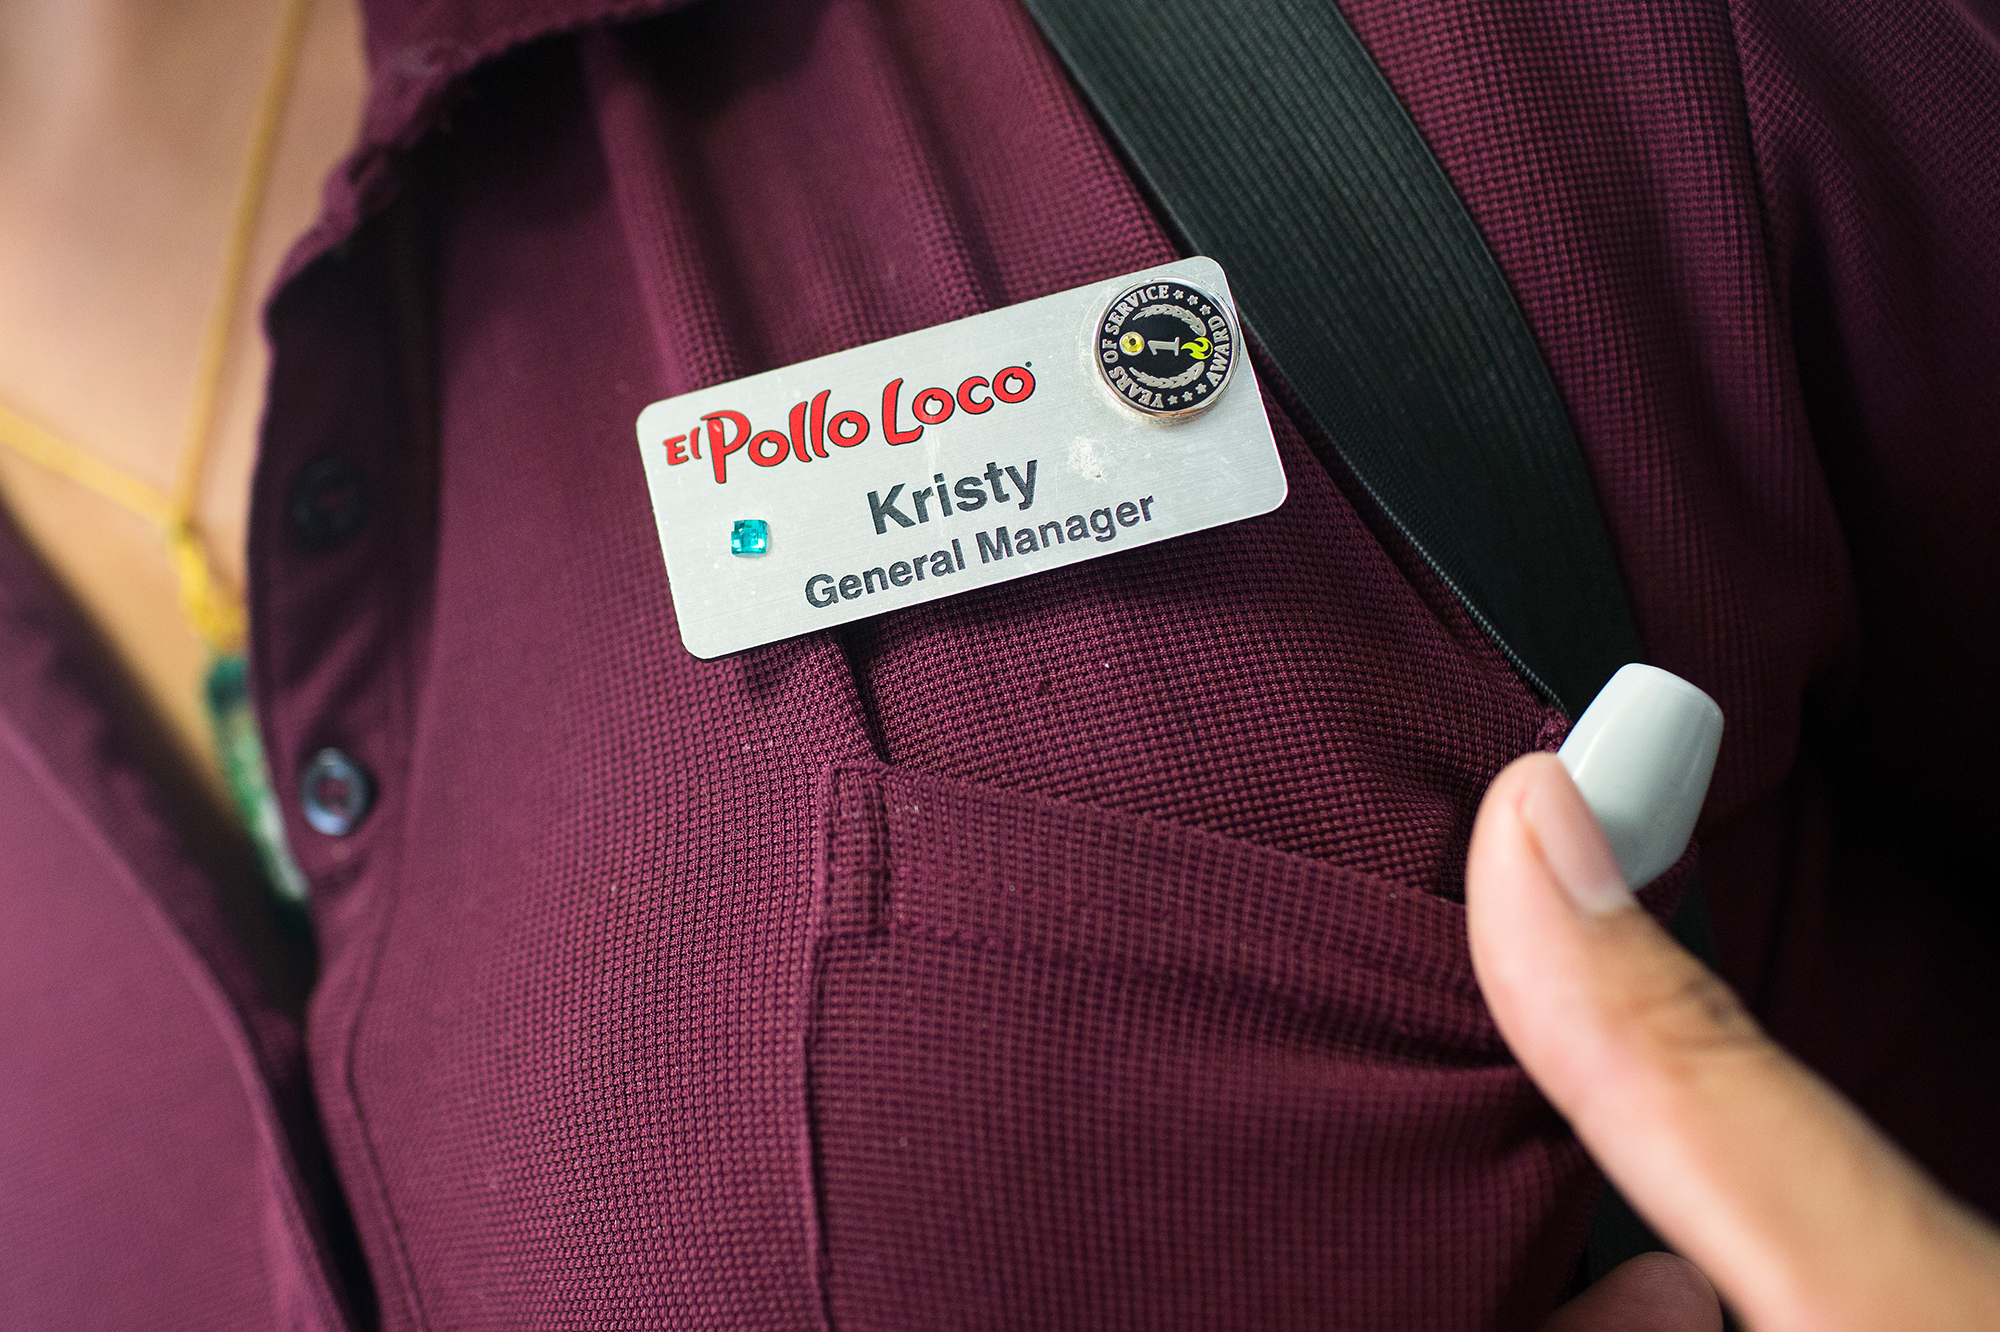 General Manager Kristy Ramirez decorated the name tag she recently received when she was promoted at one of Mendelsohn's El Pollo Loco franchises.